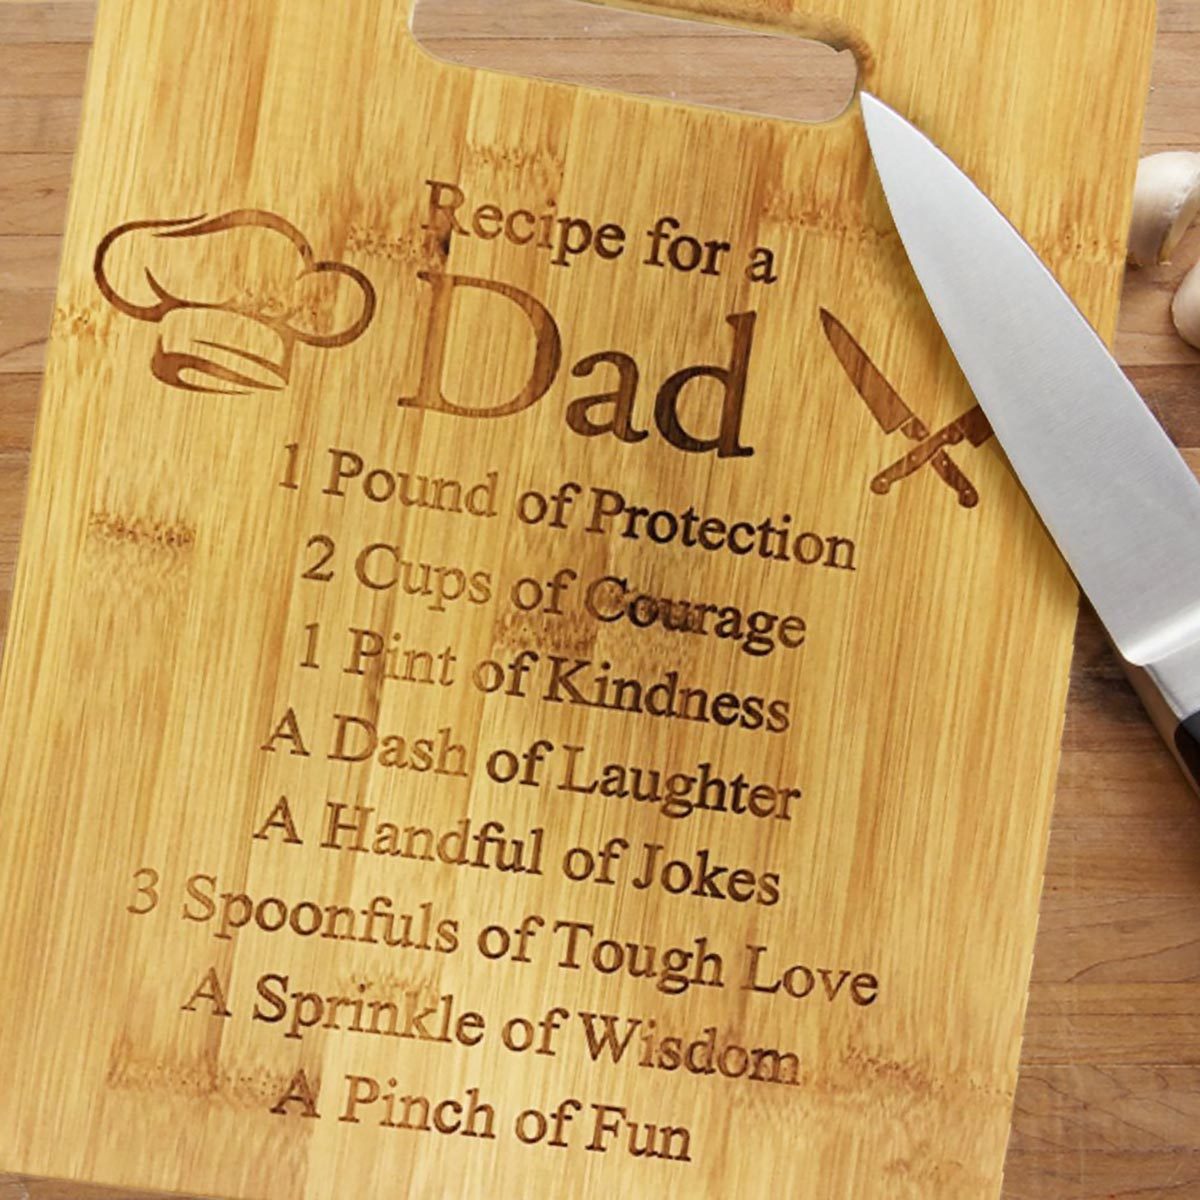 amazon prime father's day gifts